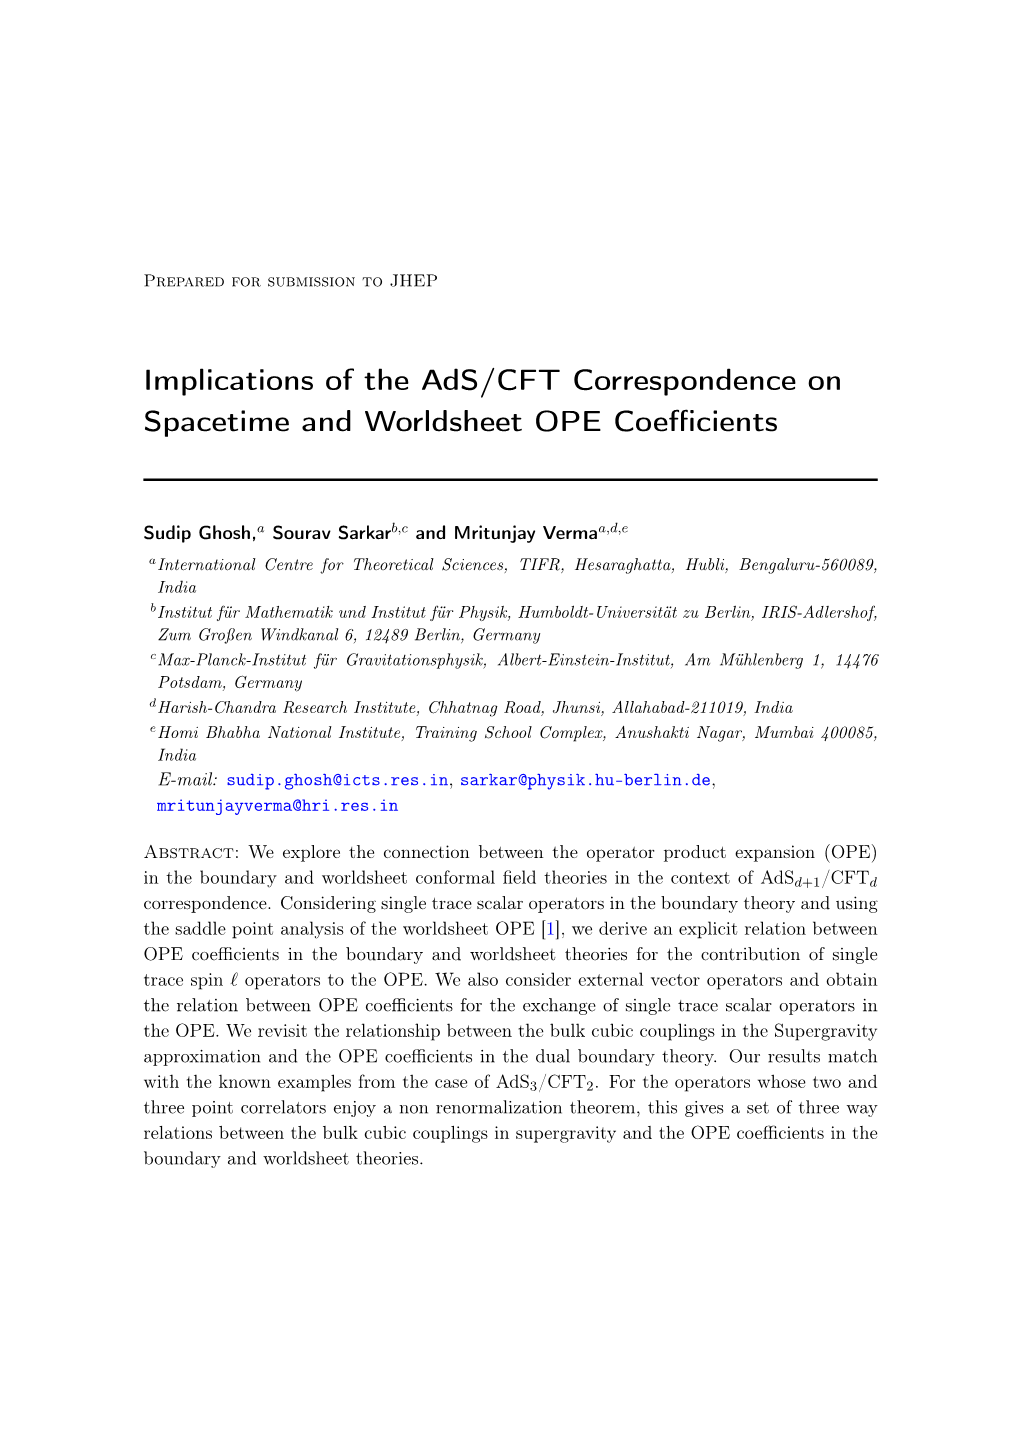 Implications of the Ads/CFT Correspondence on Spacetime and Worldsheet OPE Coeﬃcients